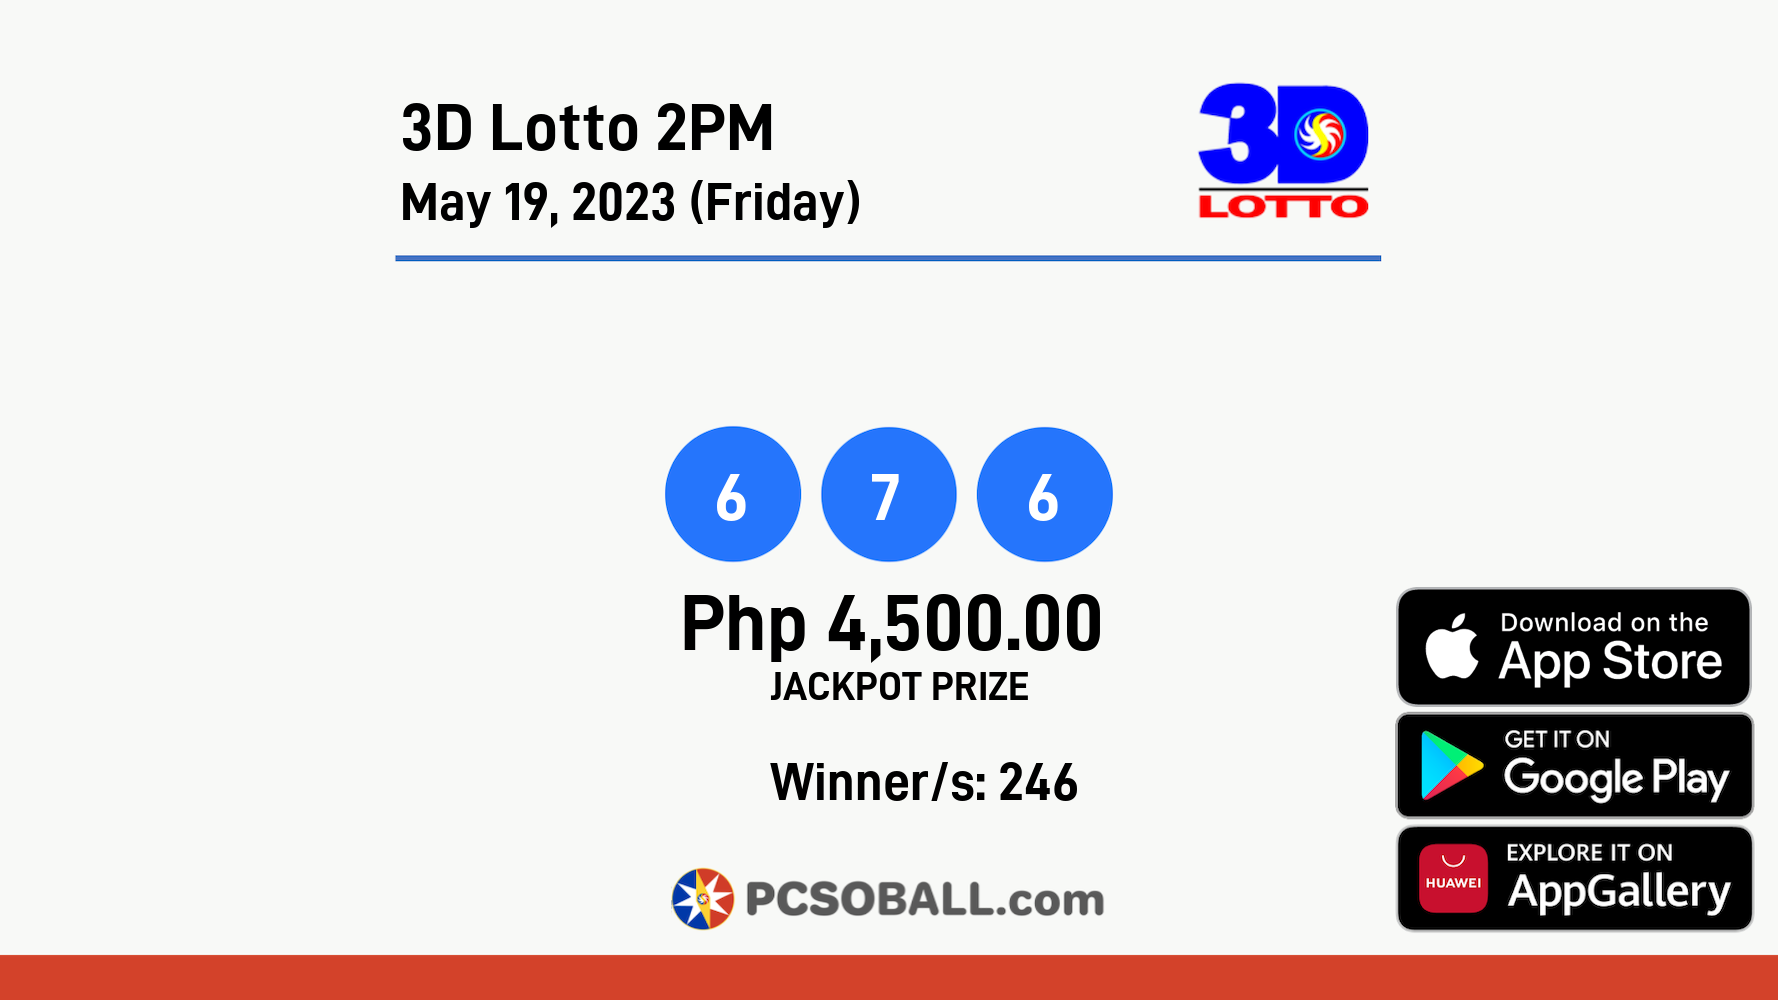 3D Lotto 2PM May 19, 2023 (Friday) Result